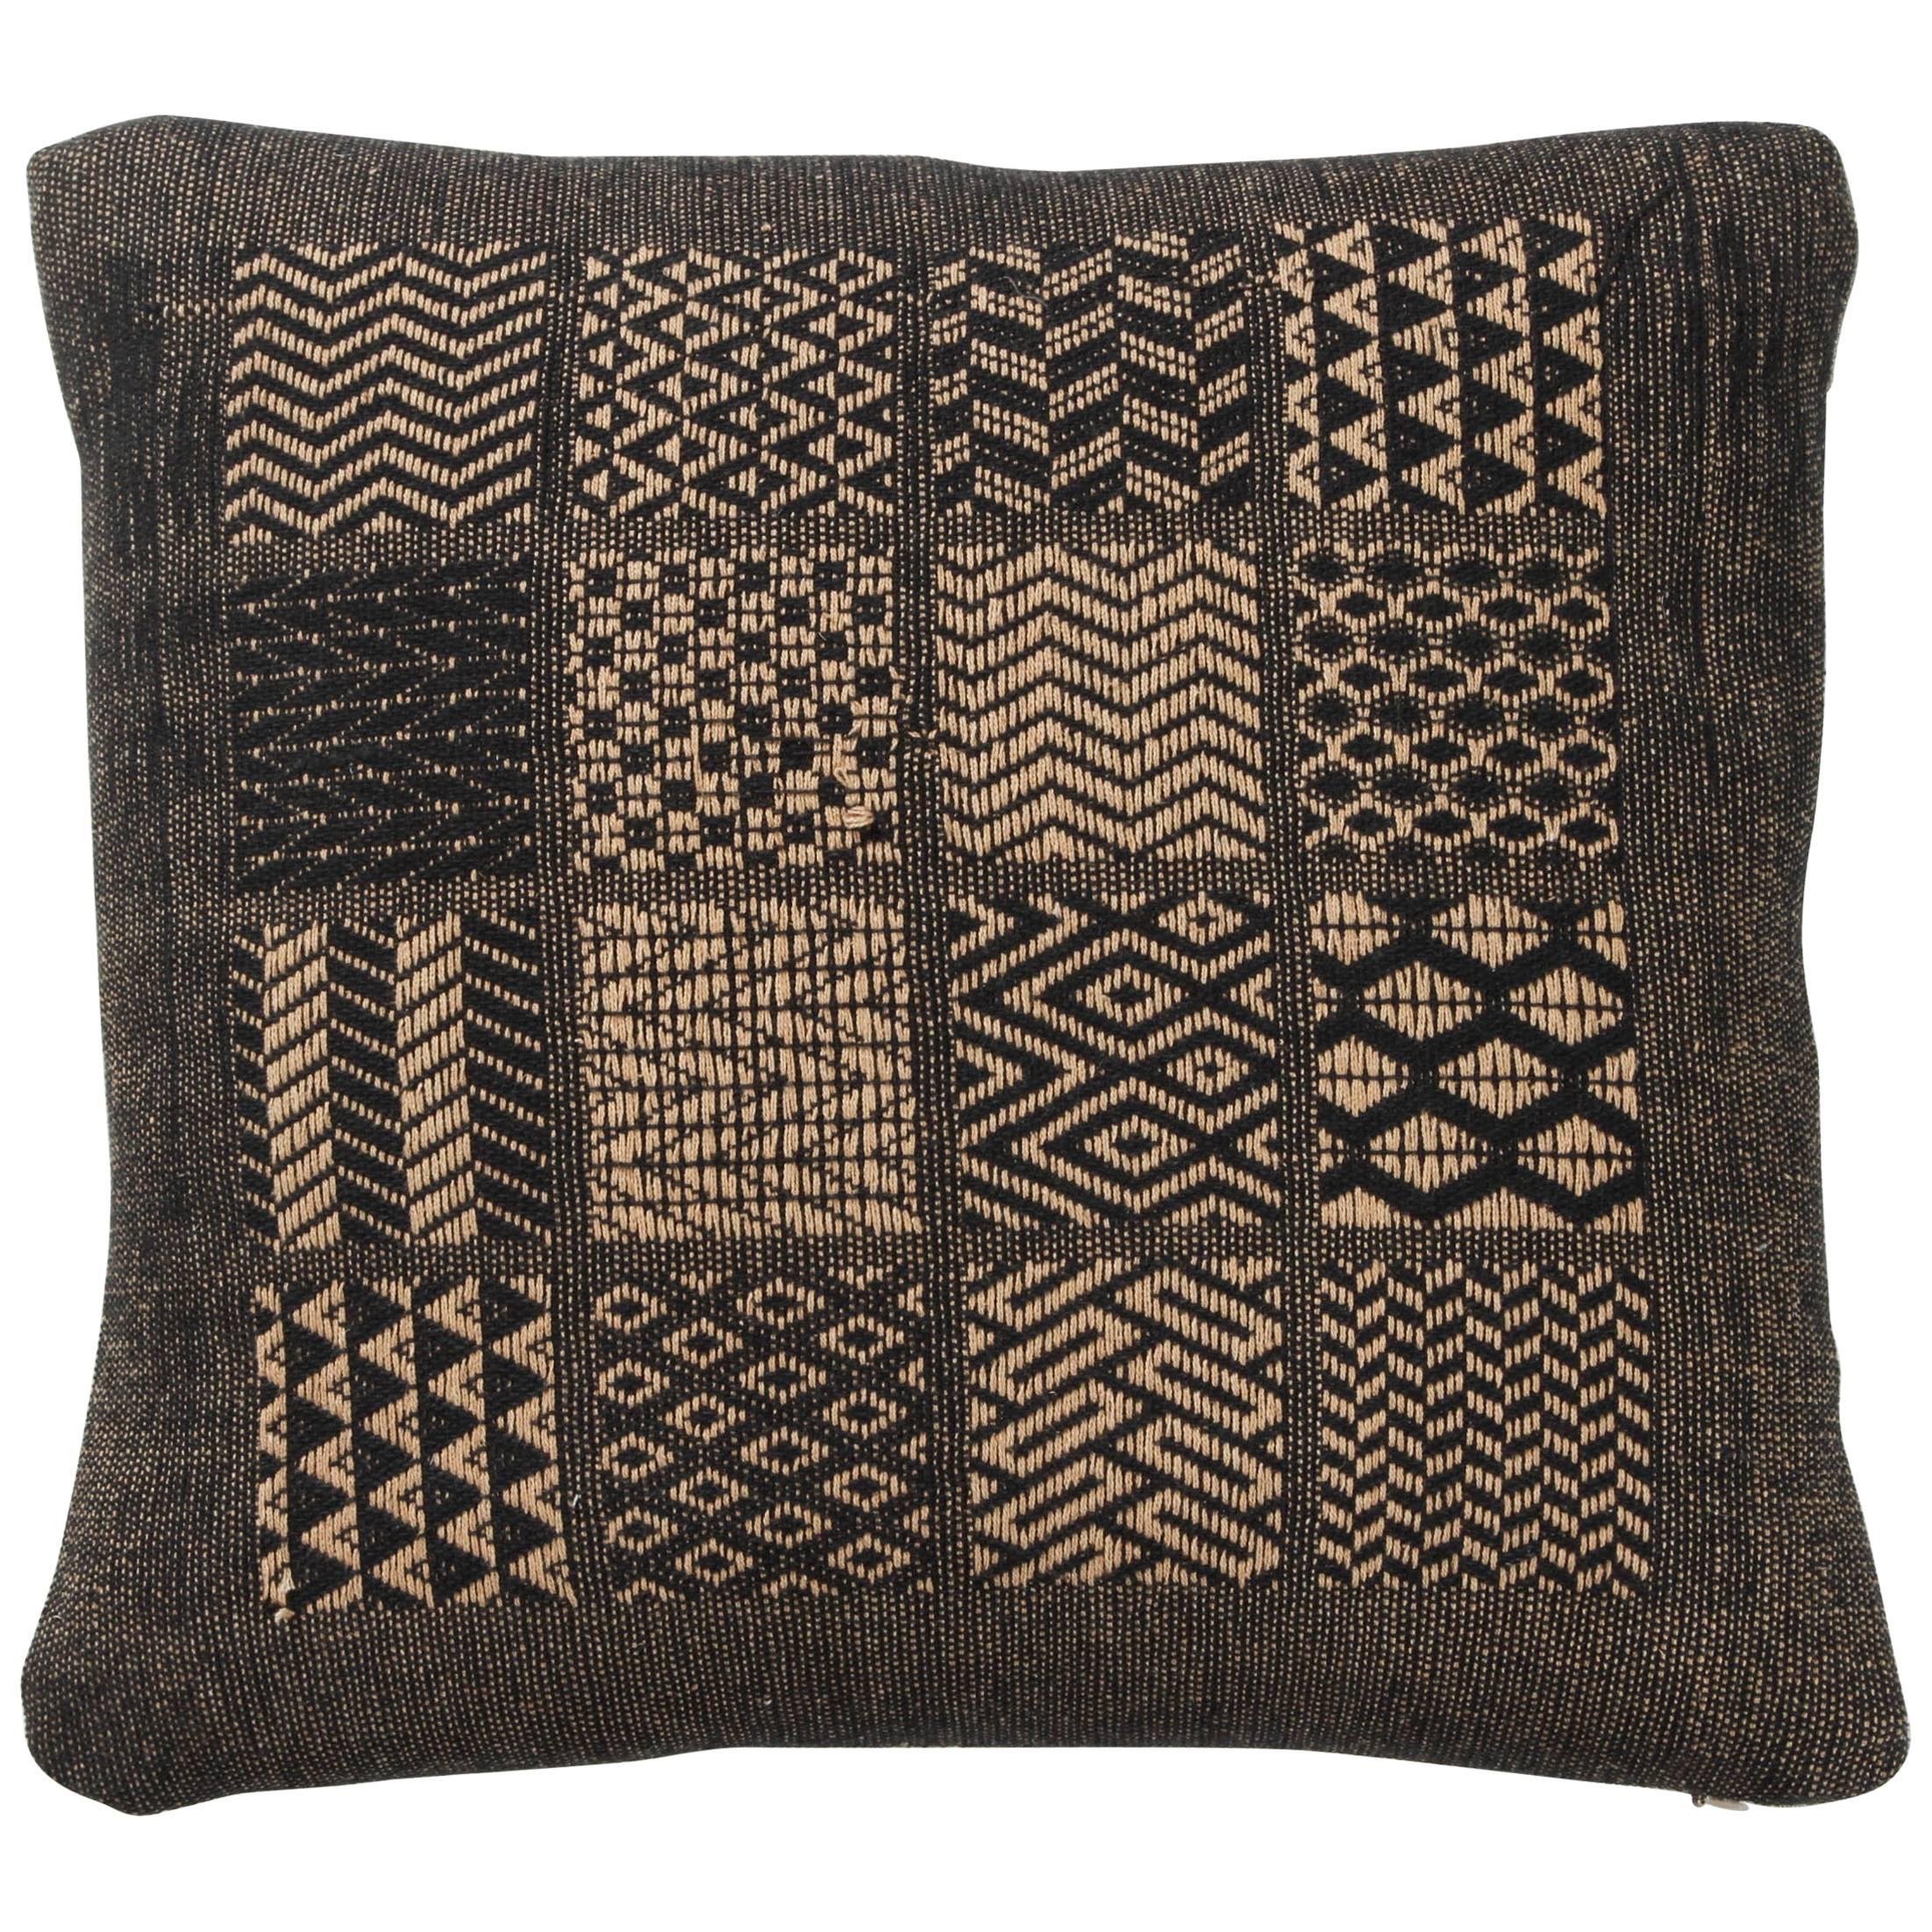 Indian Handwoven Pillow.  Black and Beige.  For Sale